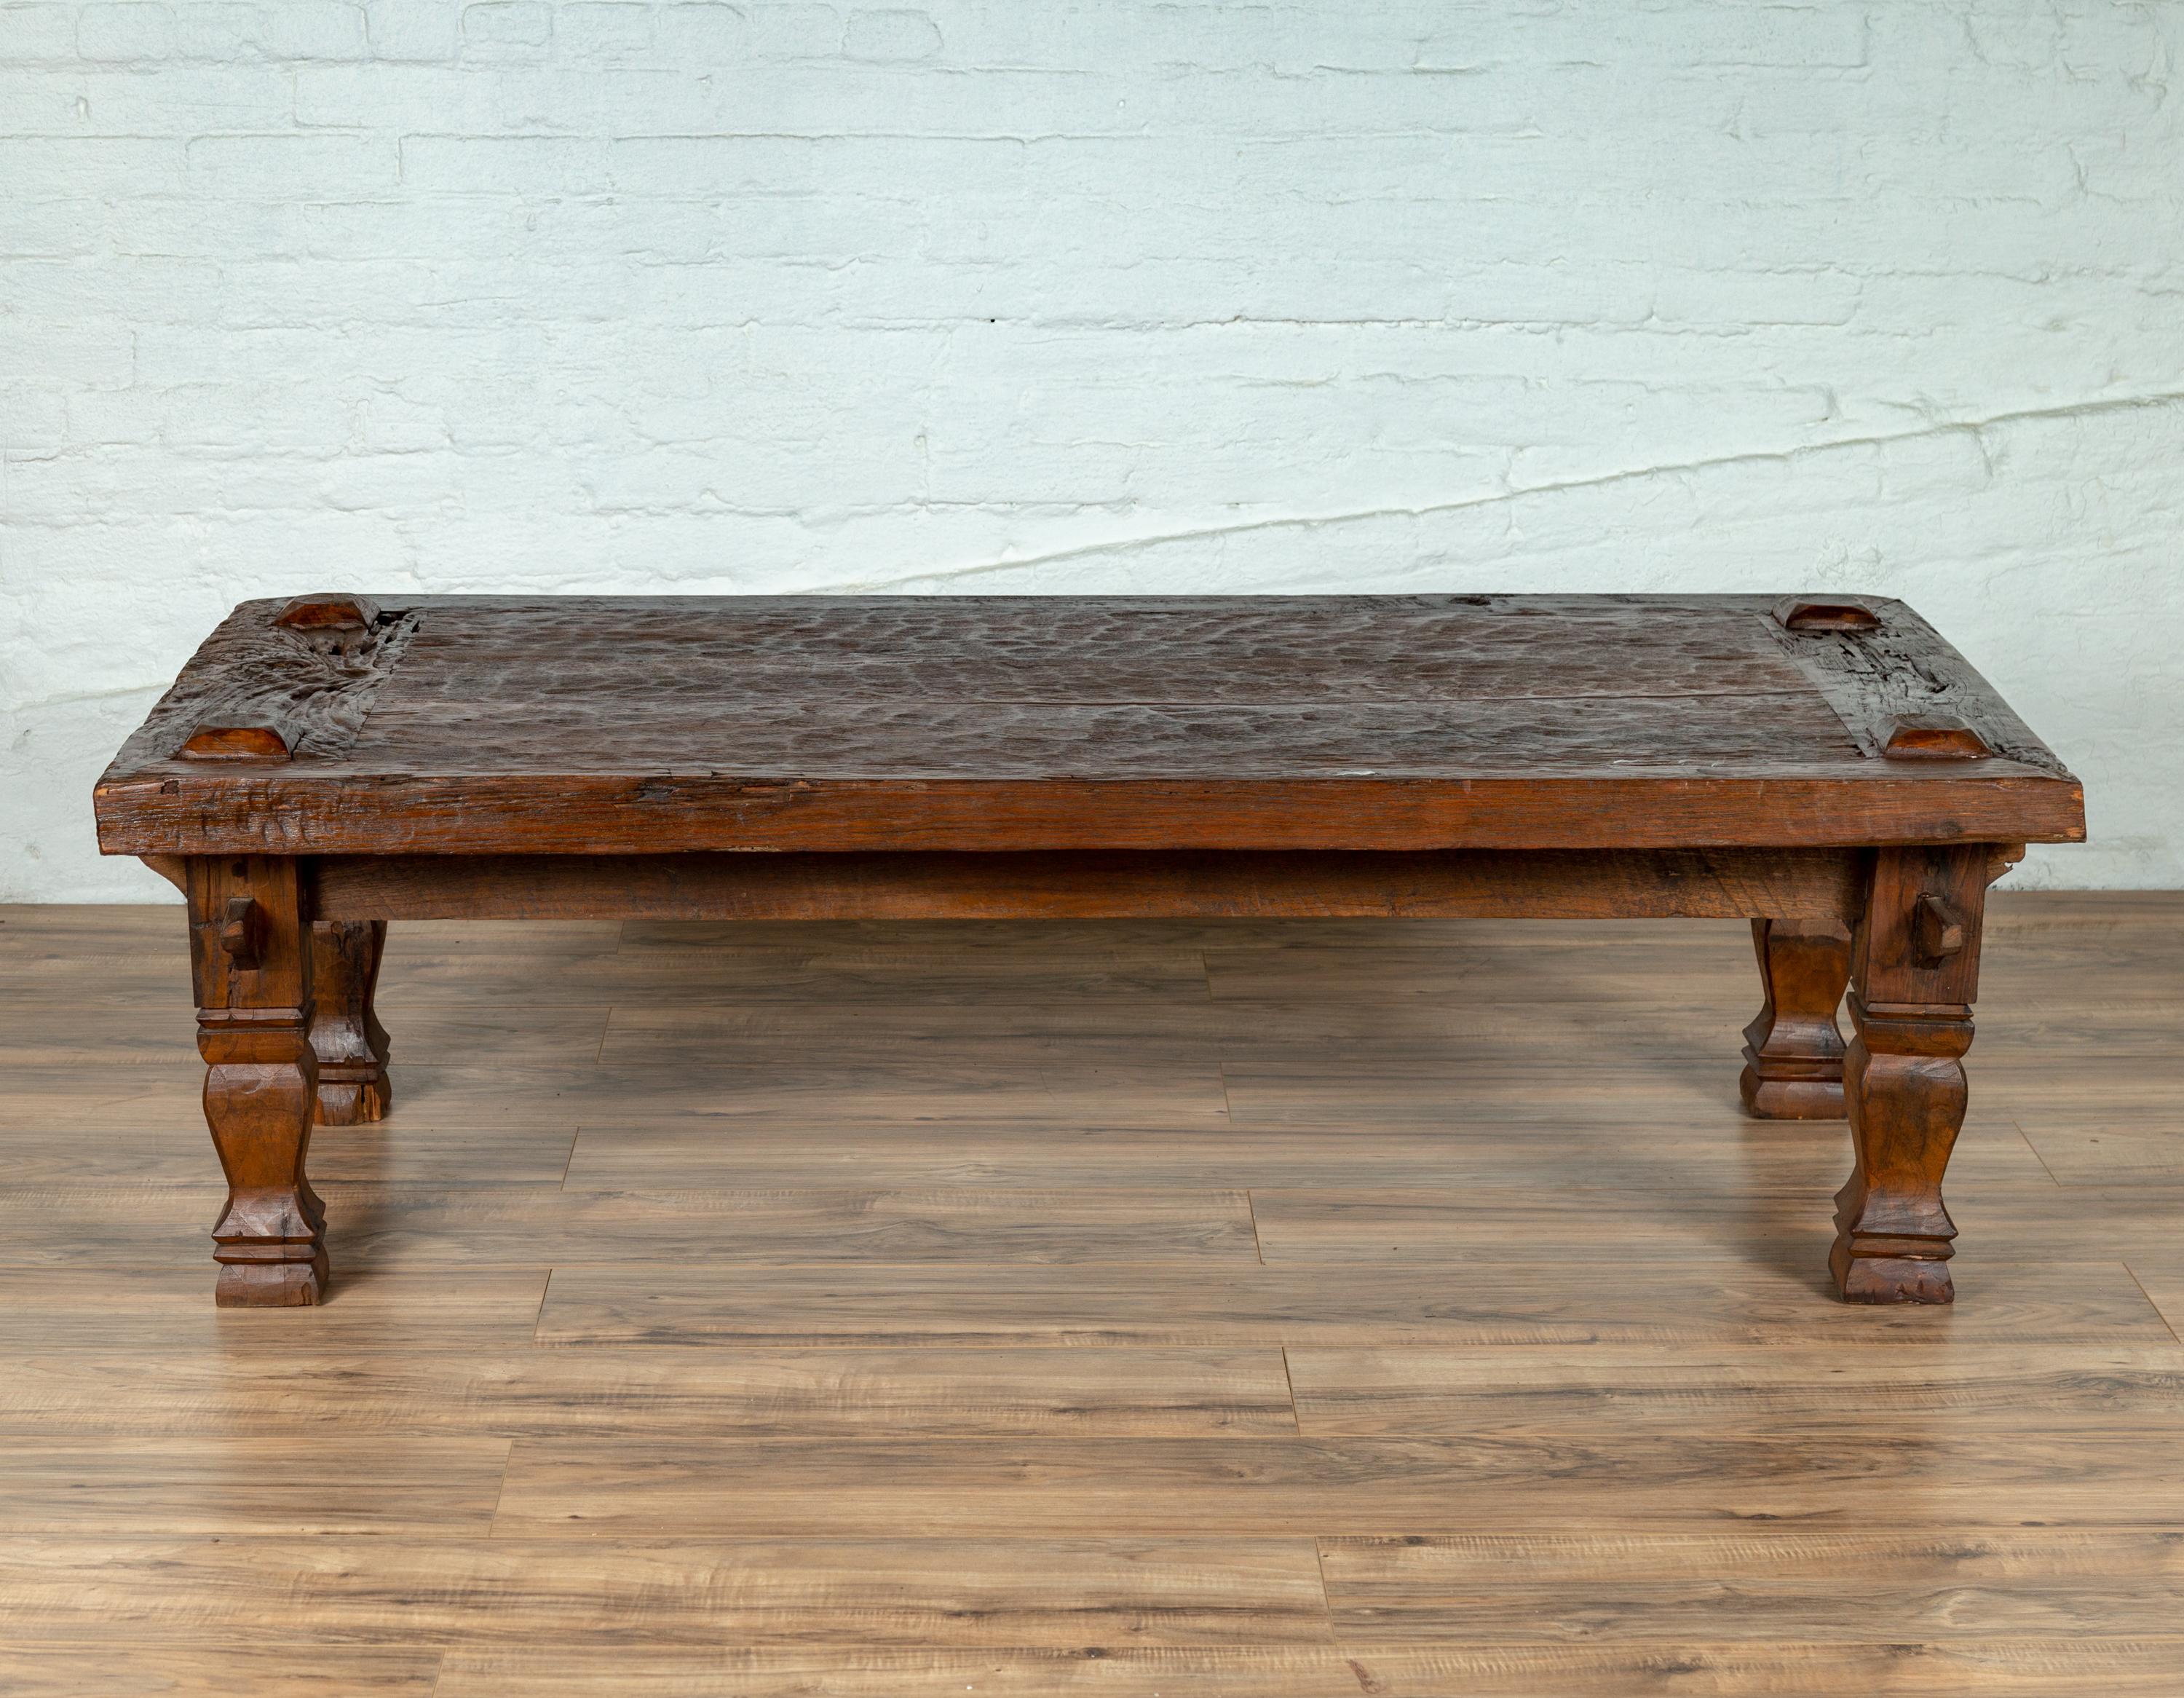 A rustic Javanese antique teak wood coffee table from the early 20th century, made from a tree. Born on the island of Java in the early years of the 20th century, this rustic teak coffee table features a nicely textured rectangular planked top with